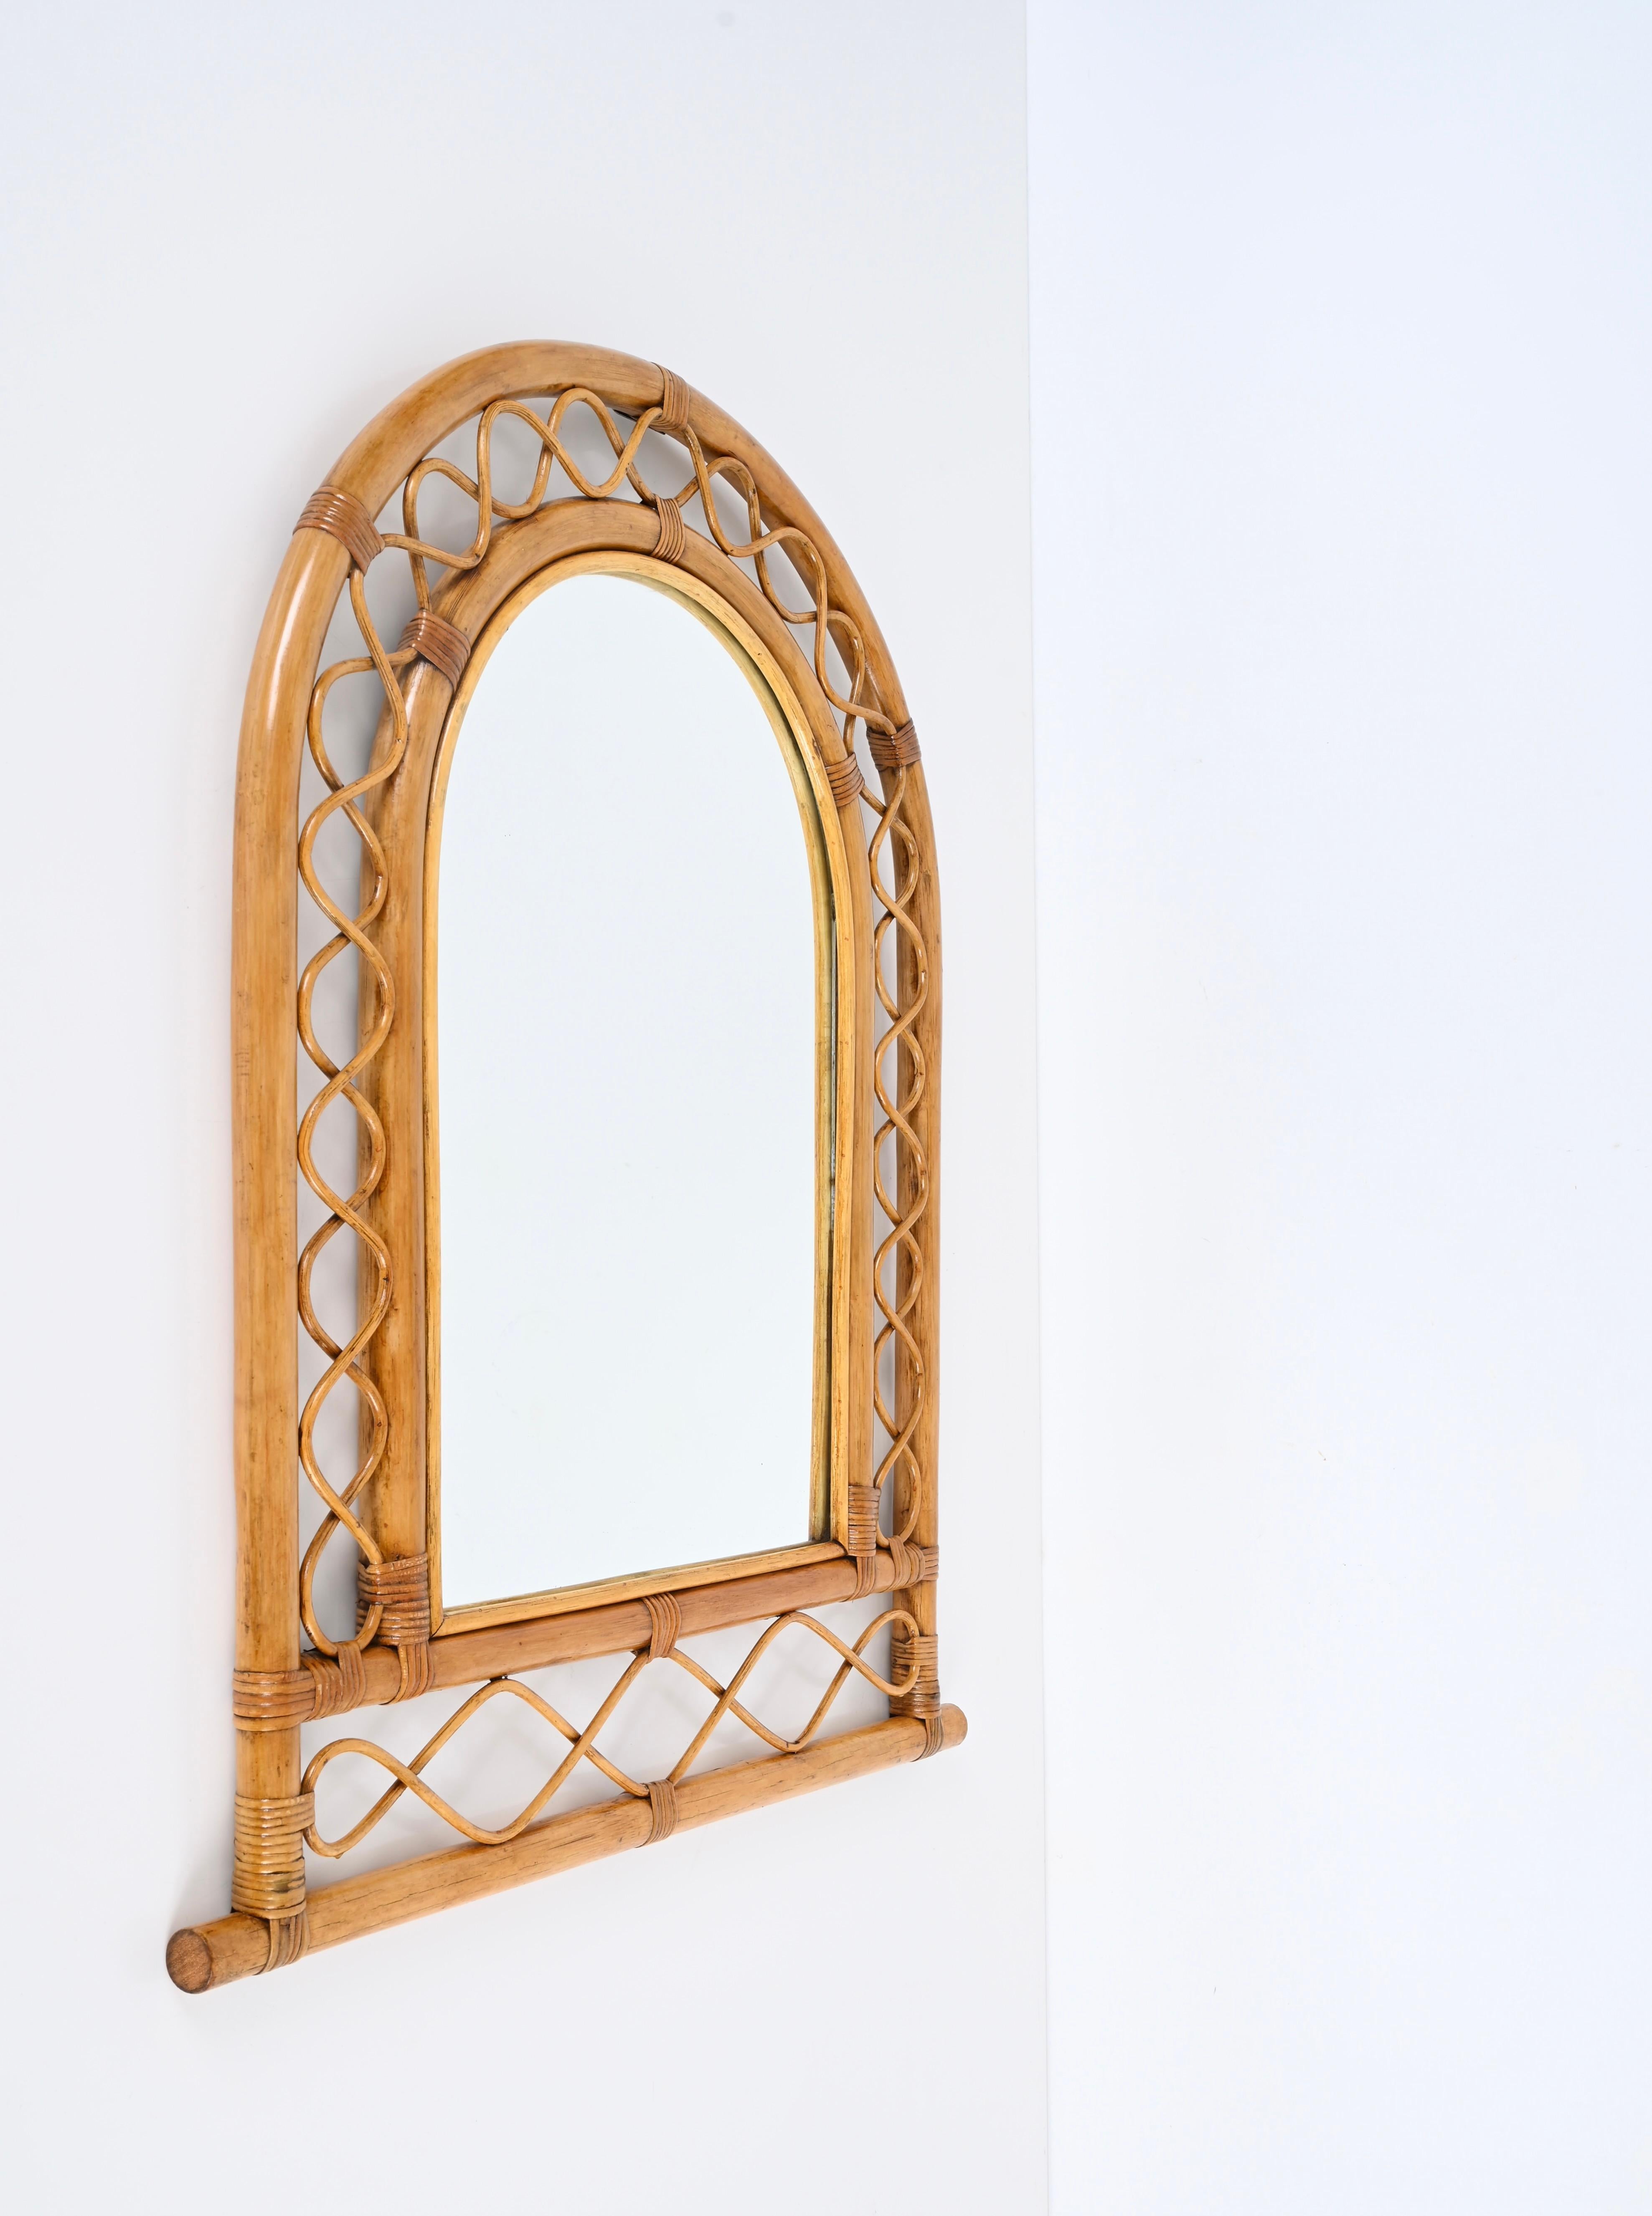 French Riviera Arch Mirror in Rattan, Wicker and Bamboo, Italy 1960s For Sale 7